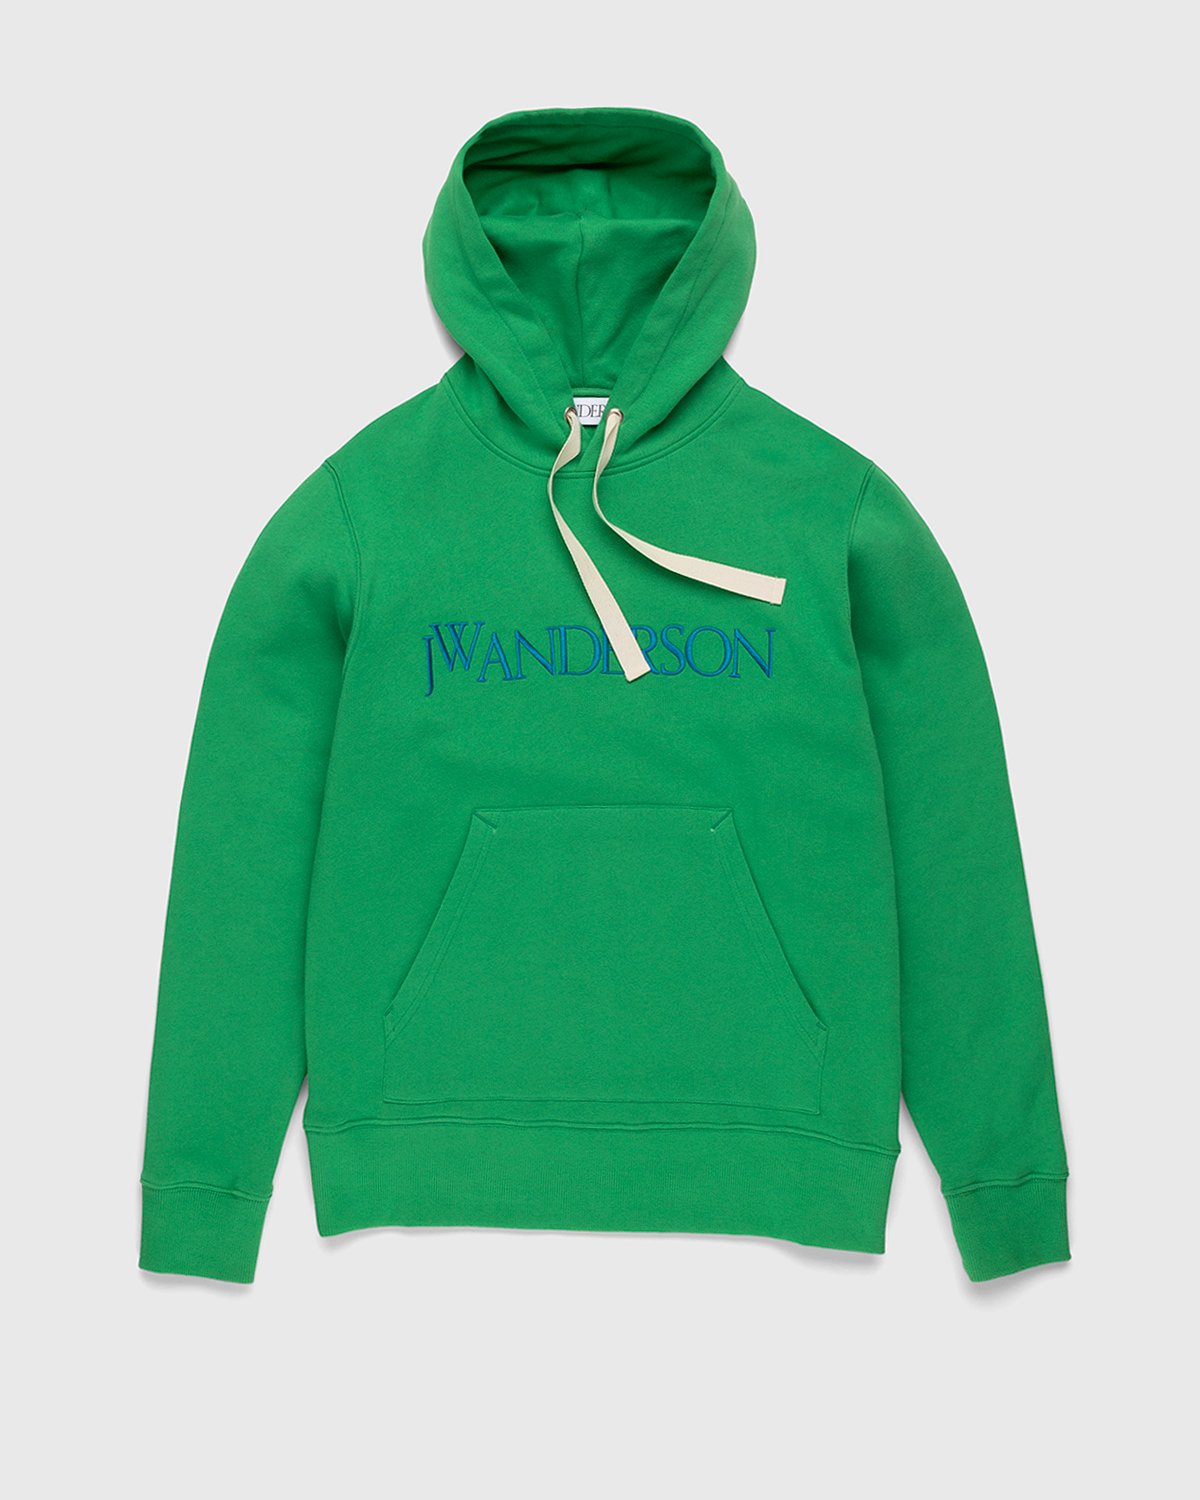 J.W. Anderson - Classic Logo Hoodie Green - Clothing - Green - Image 1